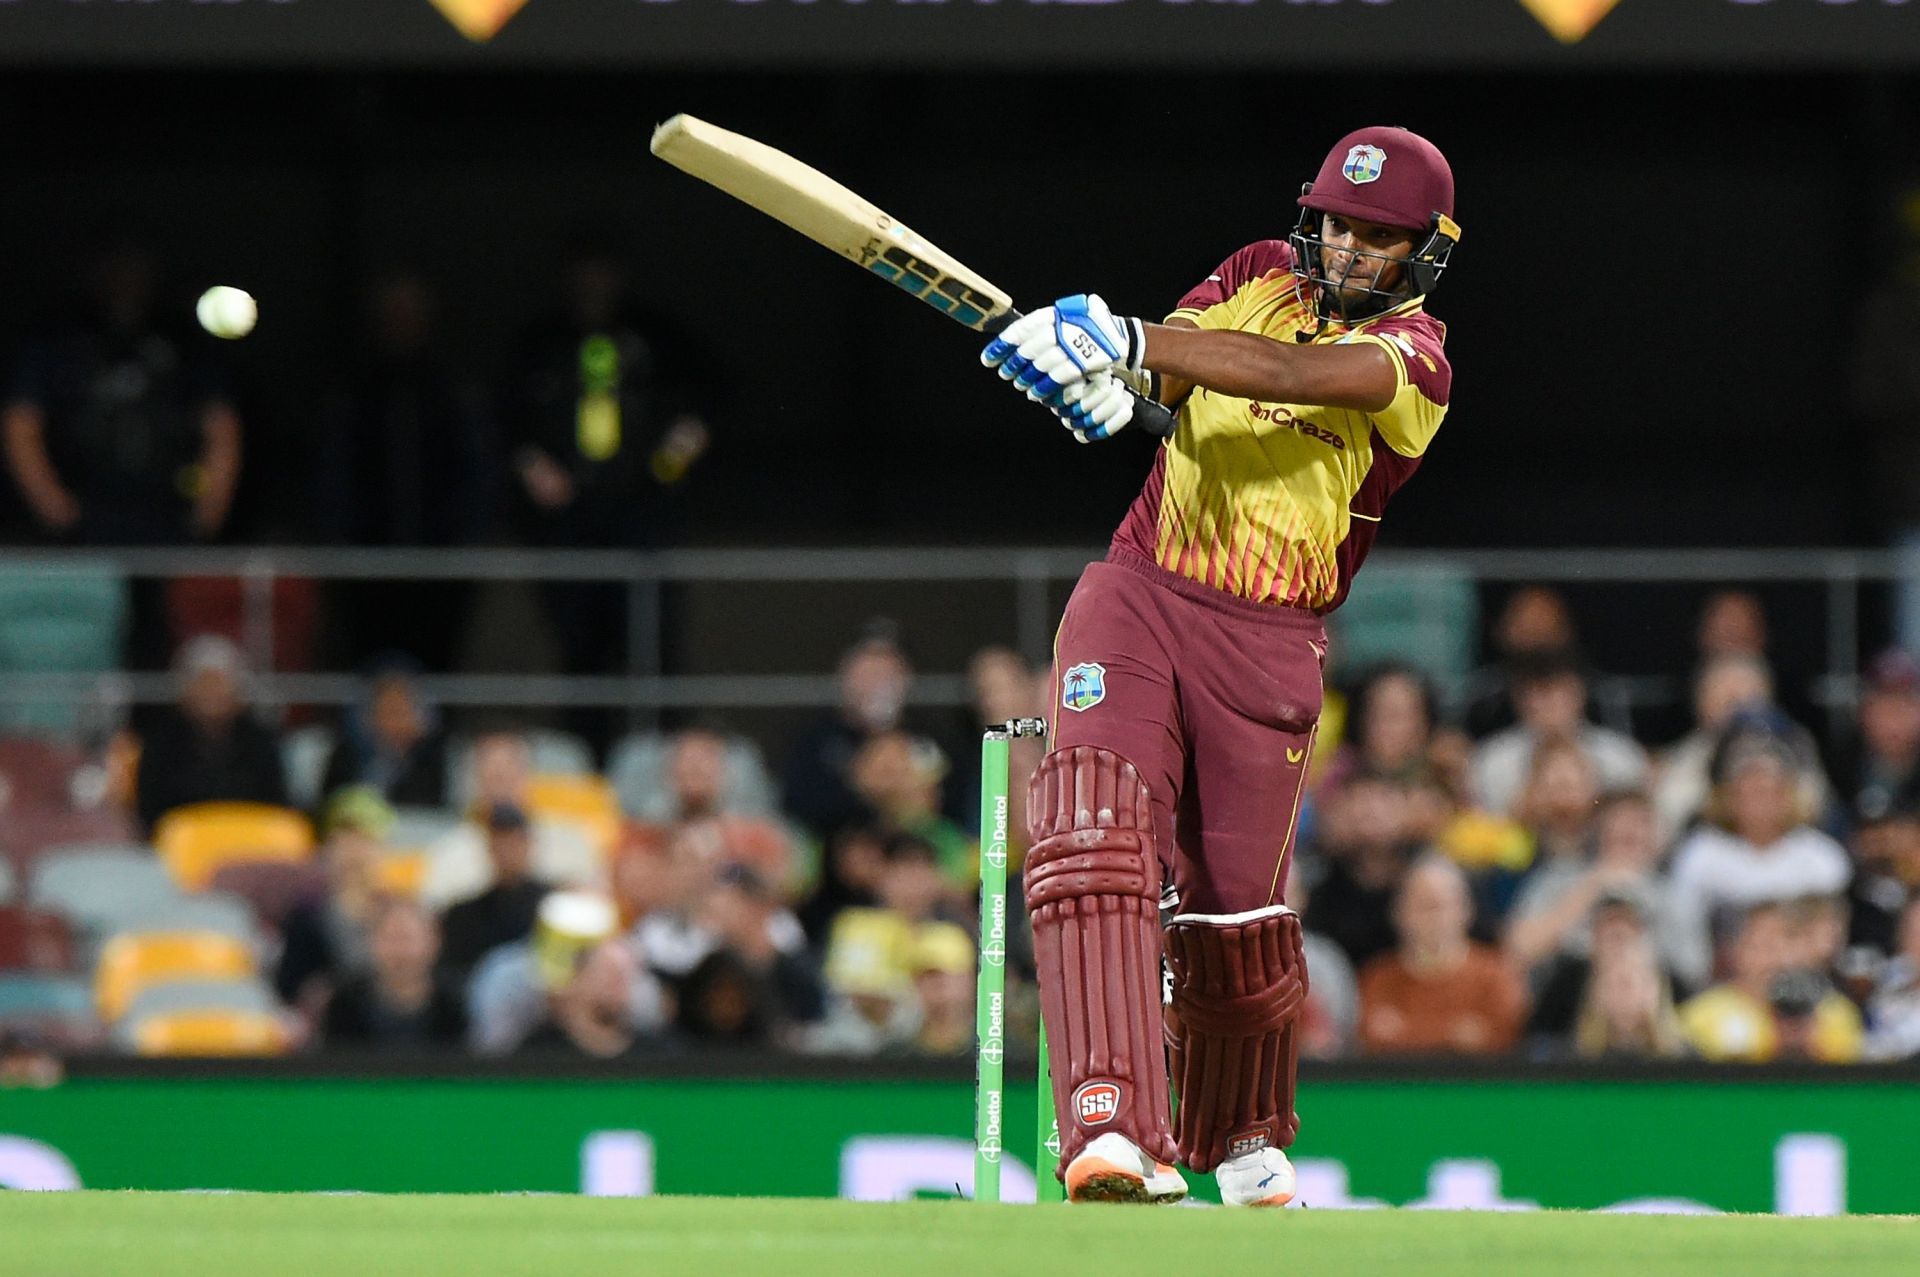 Nicholas Pooran has been in scintillating form. (Pic: Getty Images)